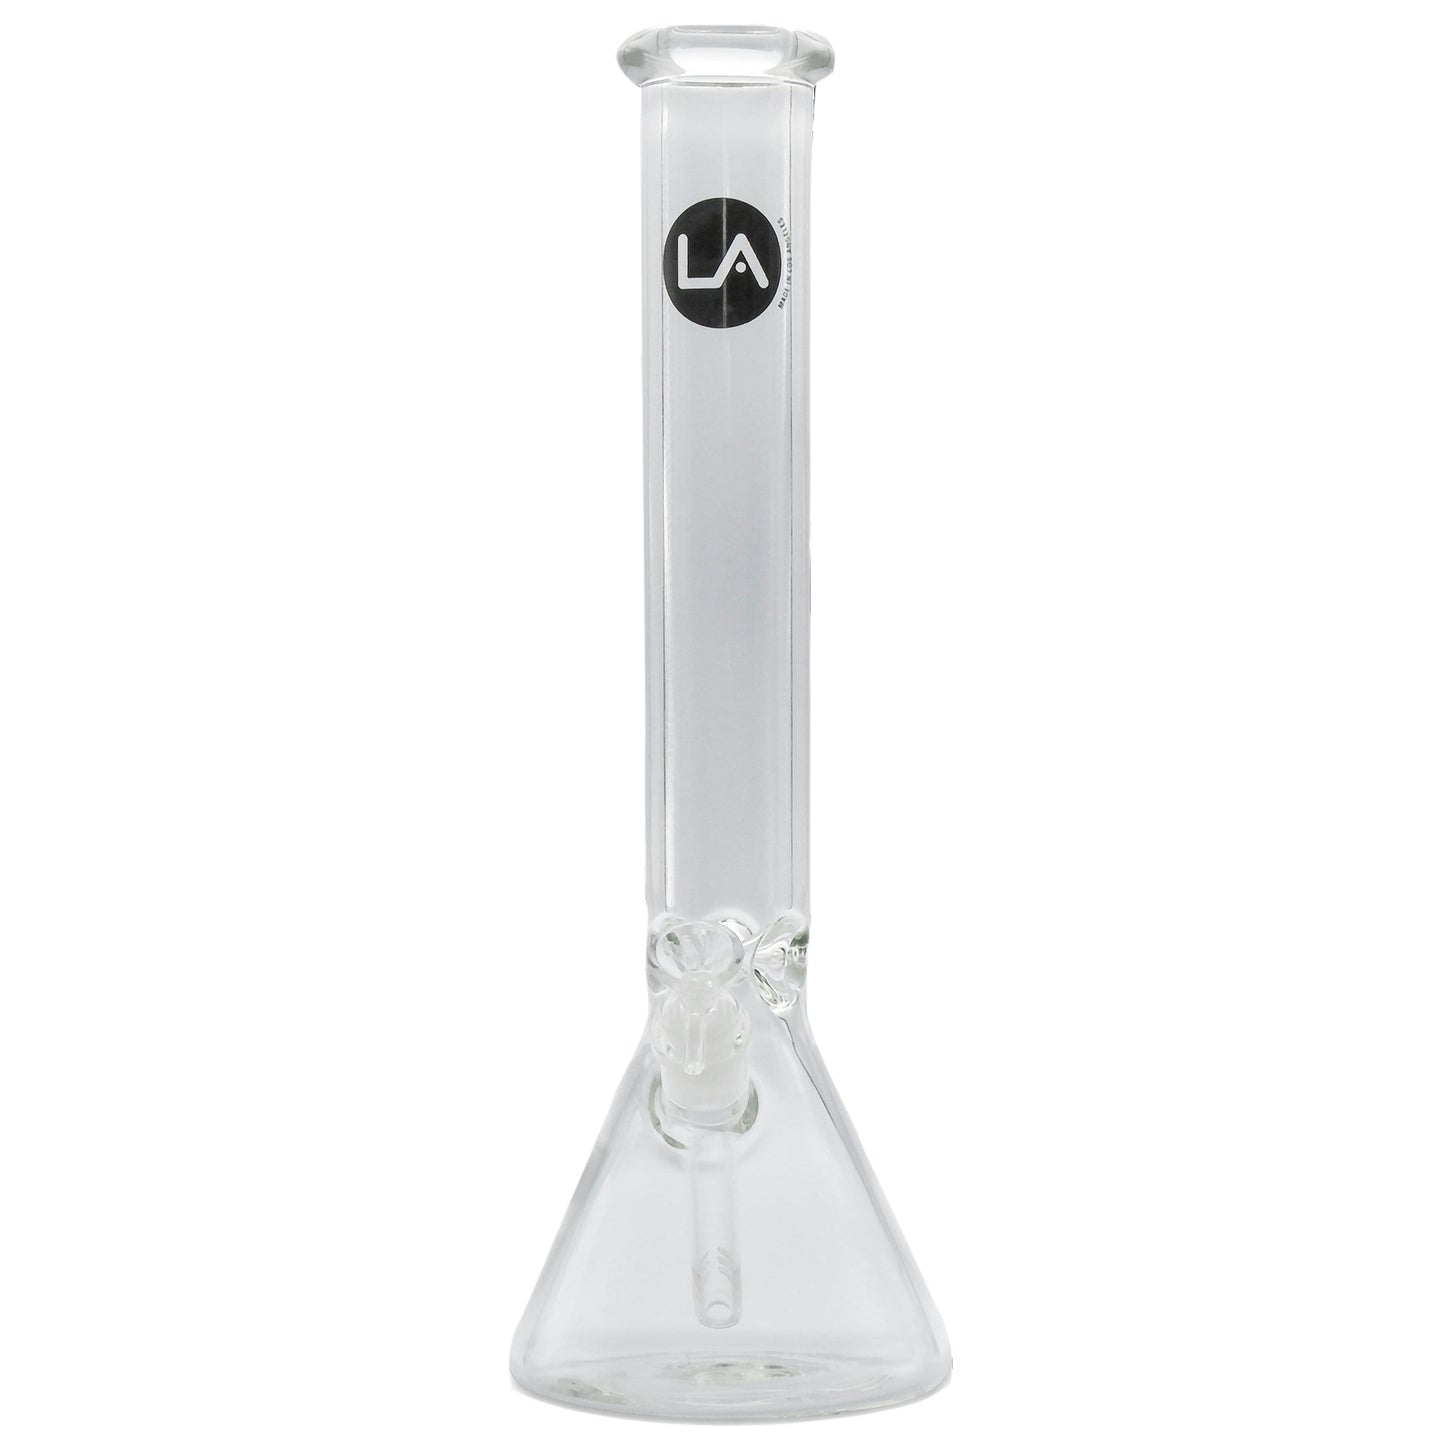 LA Pipes “Thick Boy” Super Heavy 9mm Thick 16” Beaker Bong by LA Pipes | Mission Dispensary